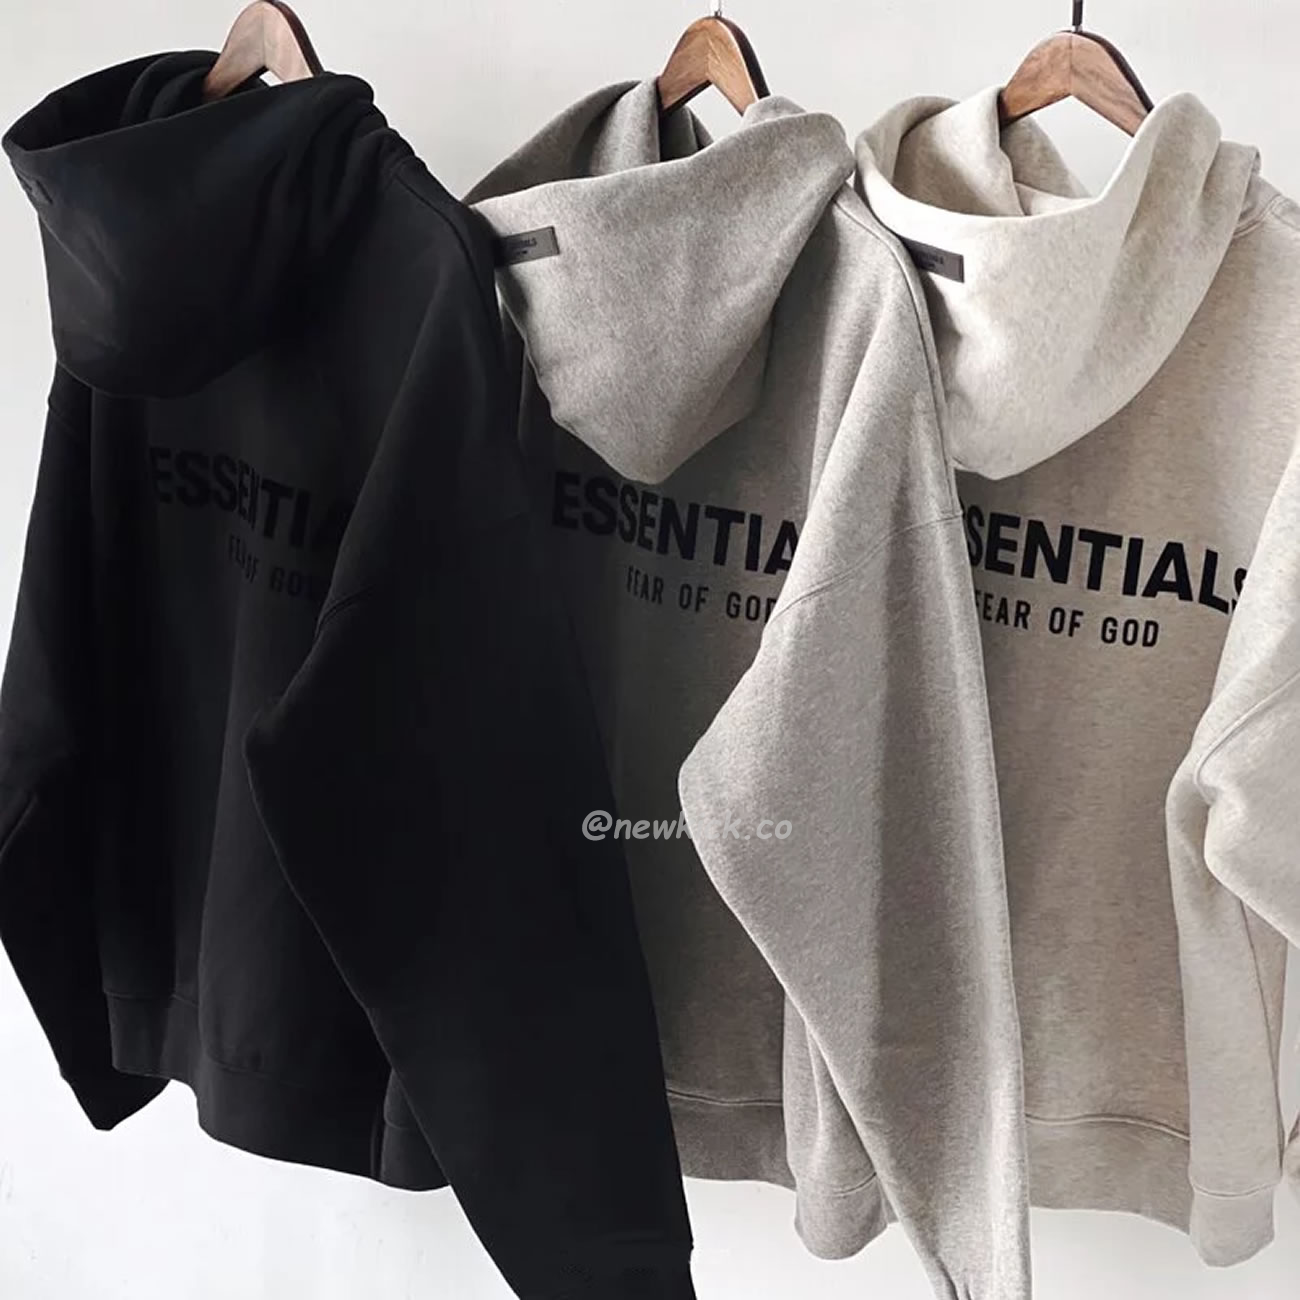 Fear Of God Essentials Core Collection Kids Pullover Hoodie Dark Heather Oatmeal (11) - newkick.org